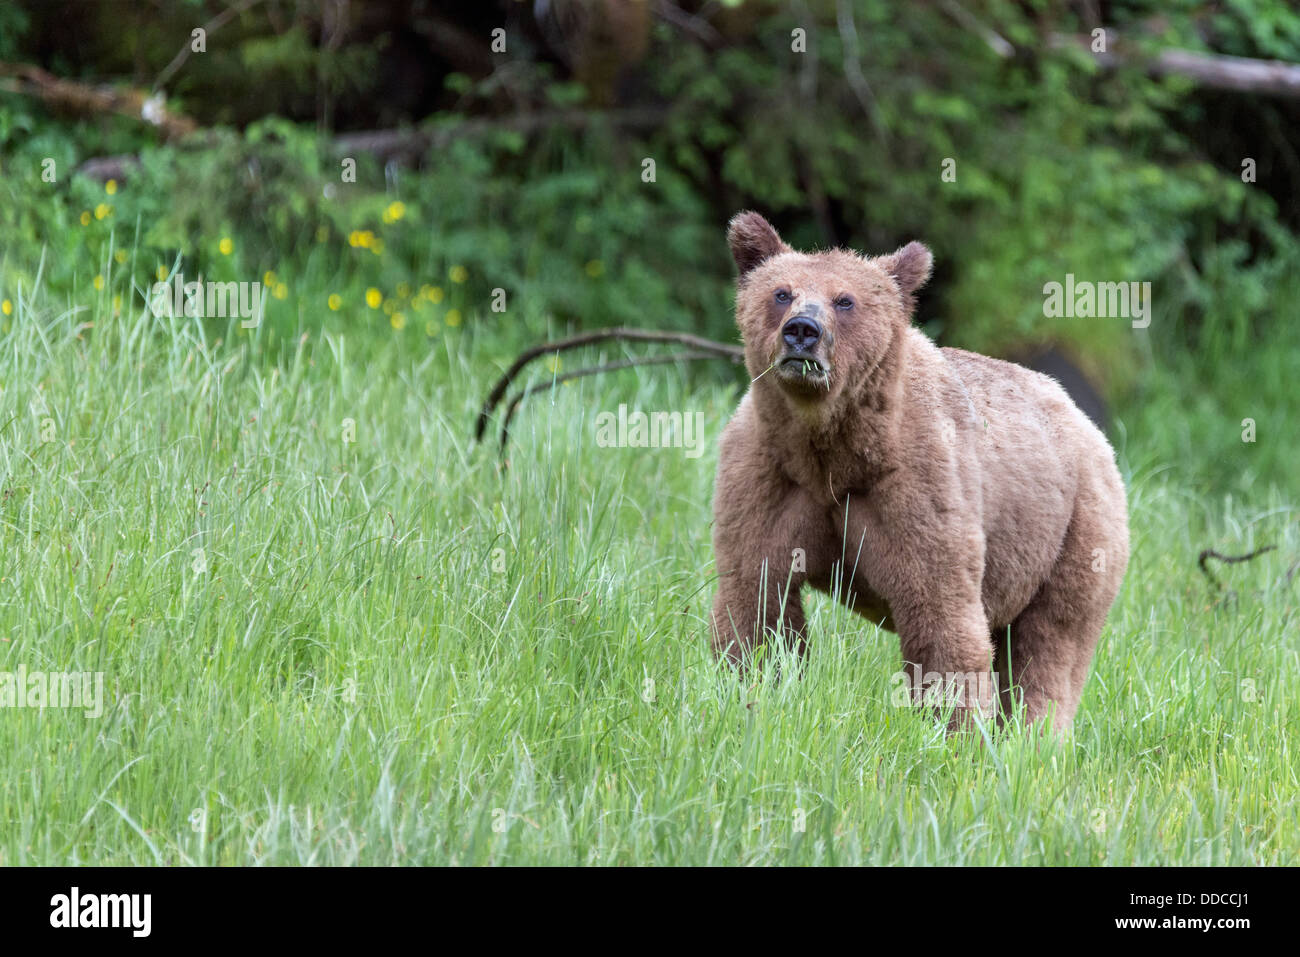 Young grizzly bear with a mouthful of sedge grass, Khutze Inlet, British Columbia Stock Photo